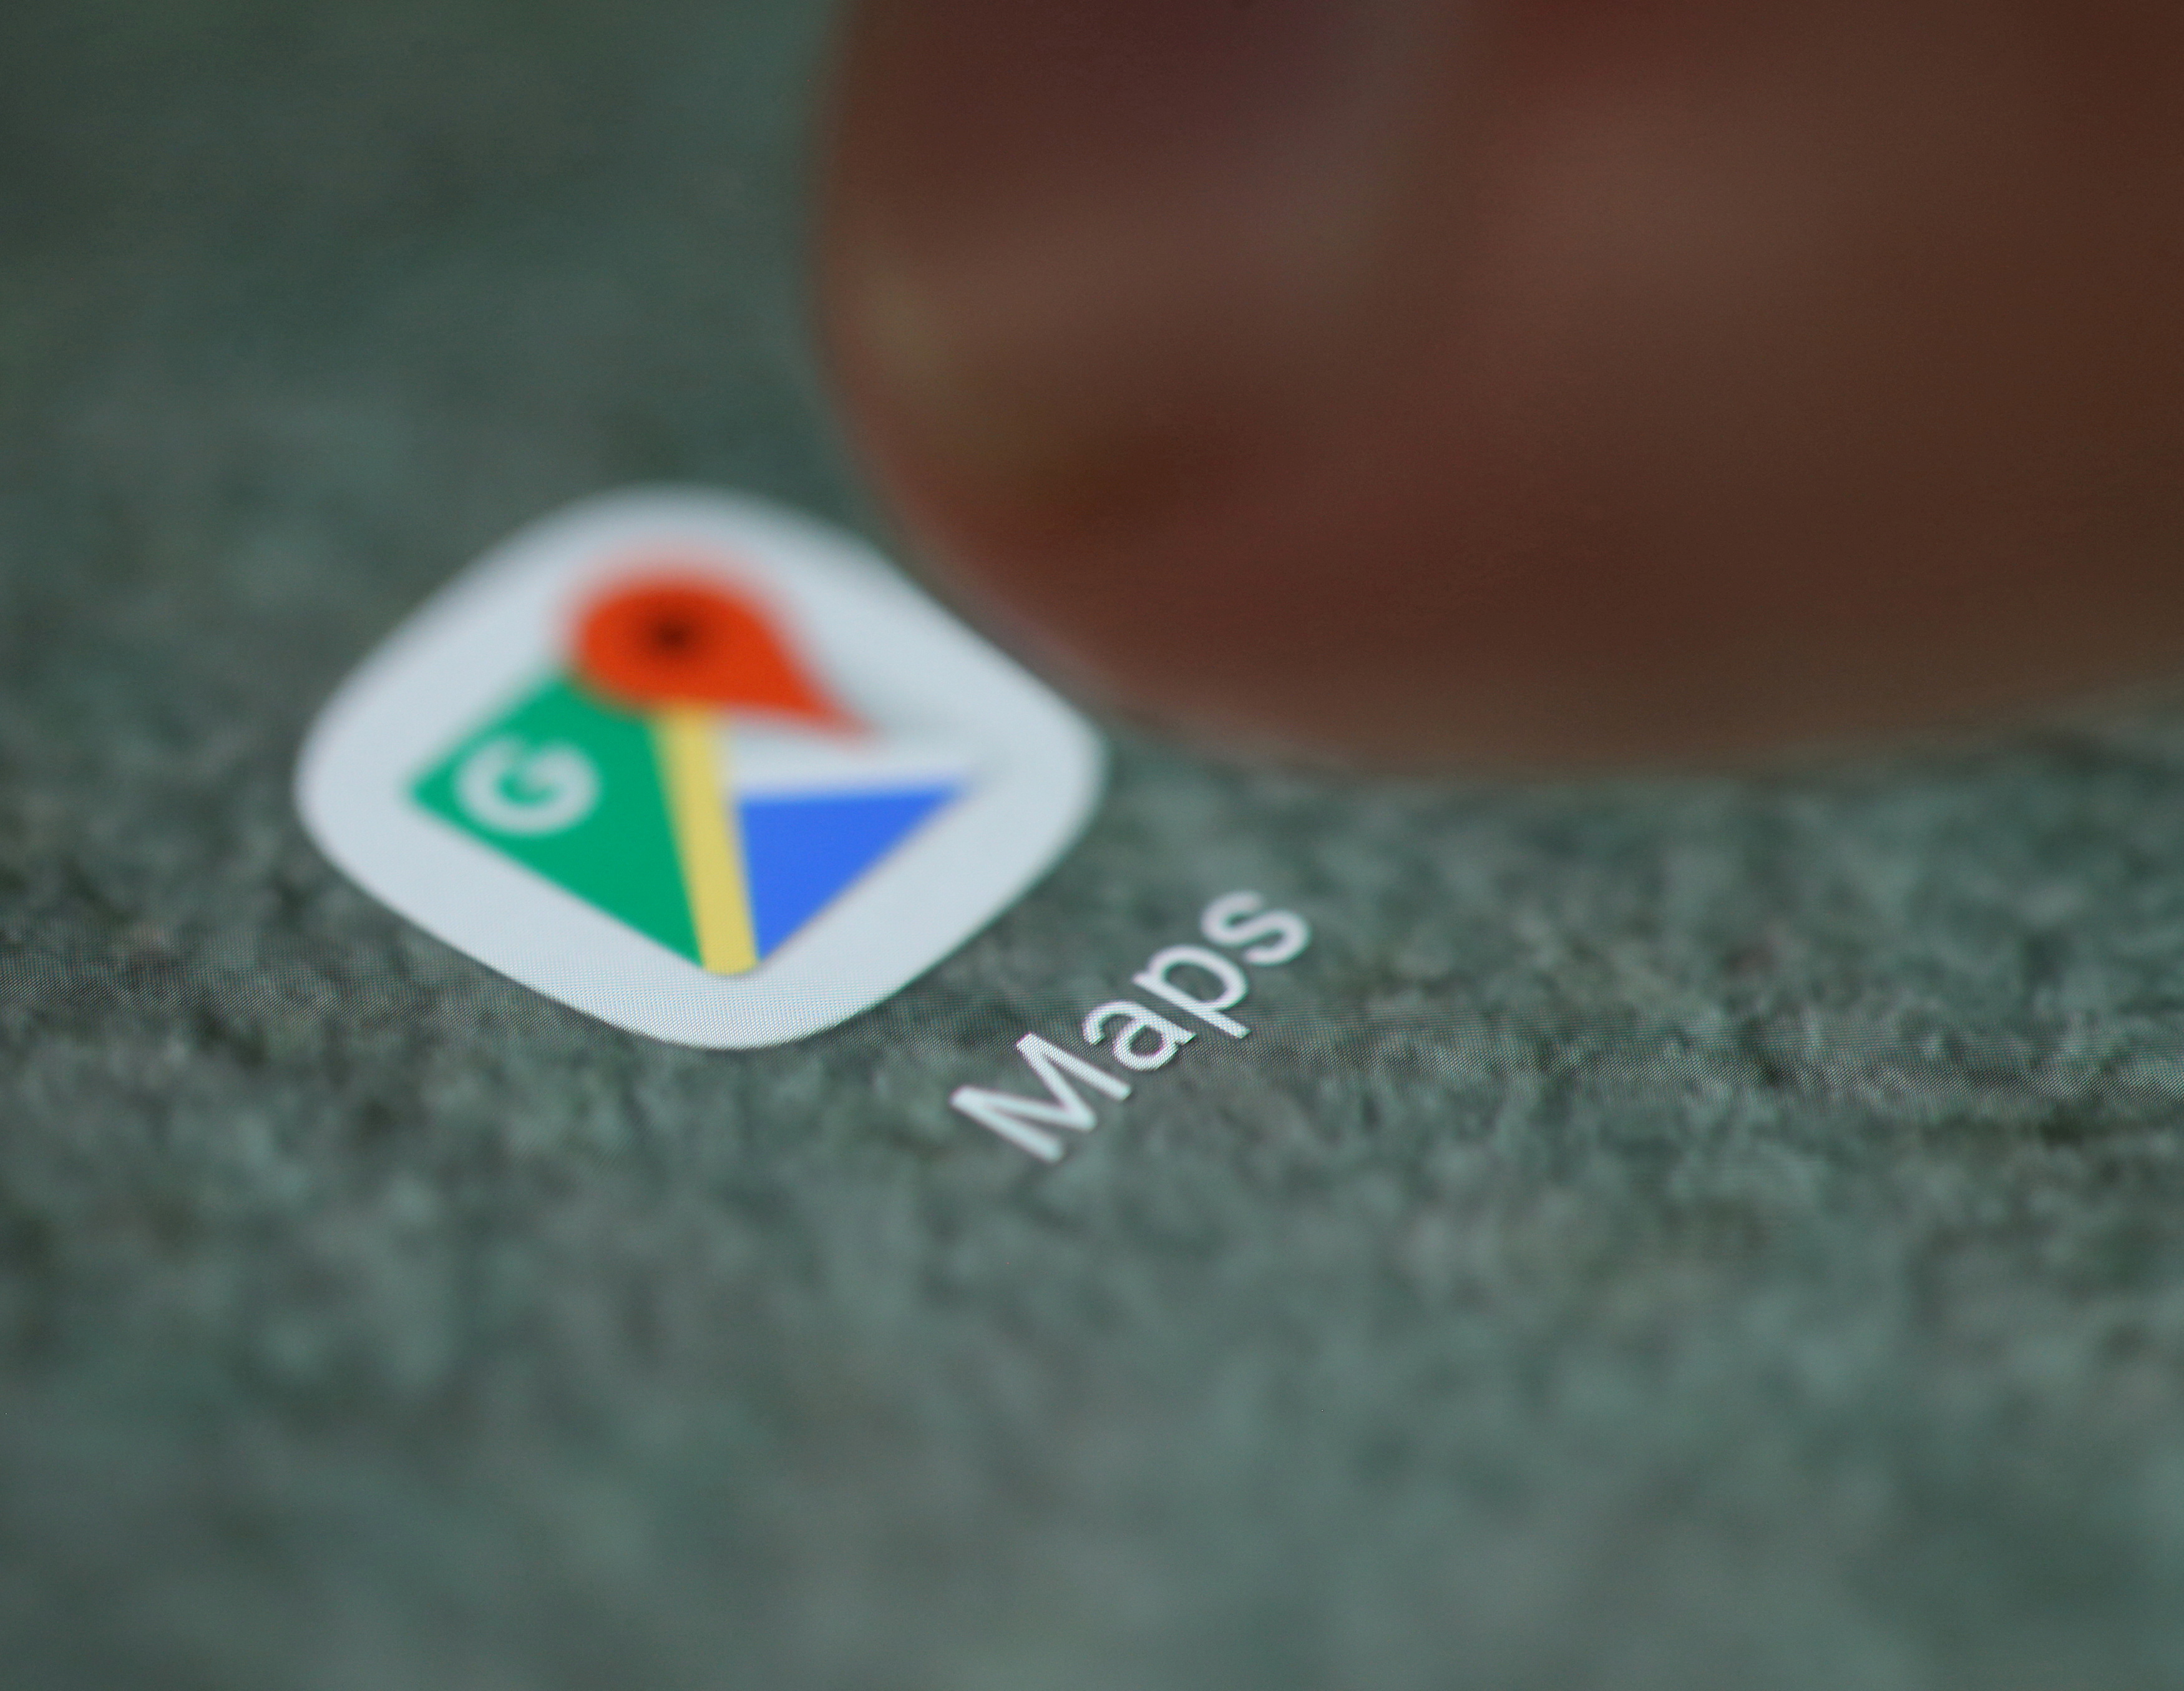 FILE PHOTO: The Google Maps app logo is seen on a smartphone in this picture illustration taken September 15, 2017. REUTERS/Dado Ruvic/Illustration/File Photo